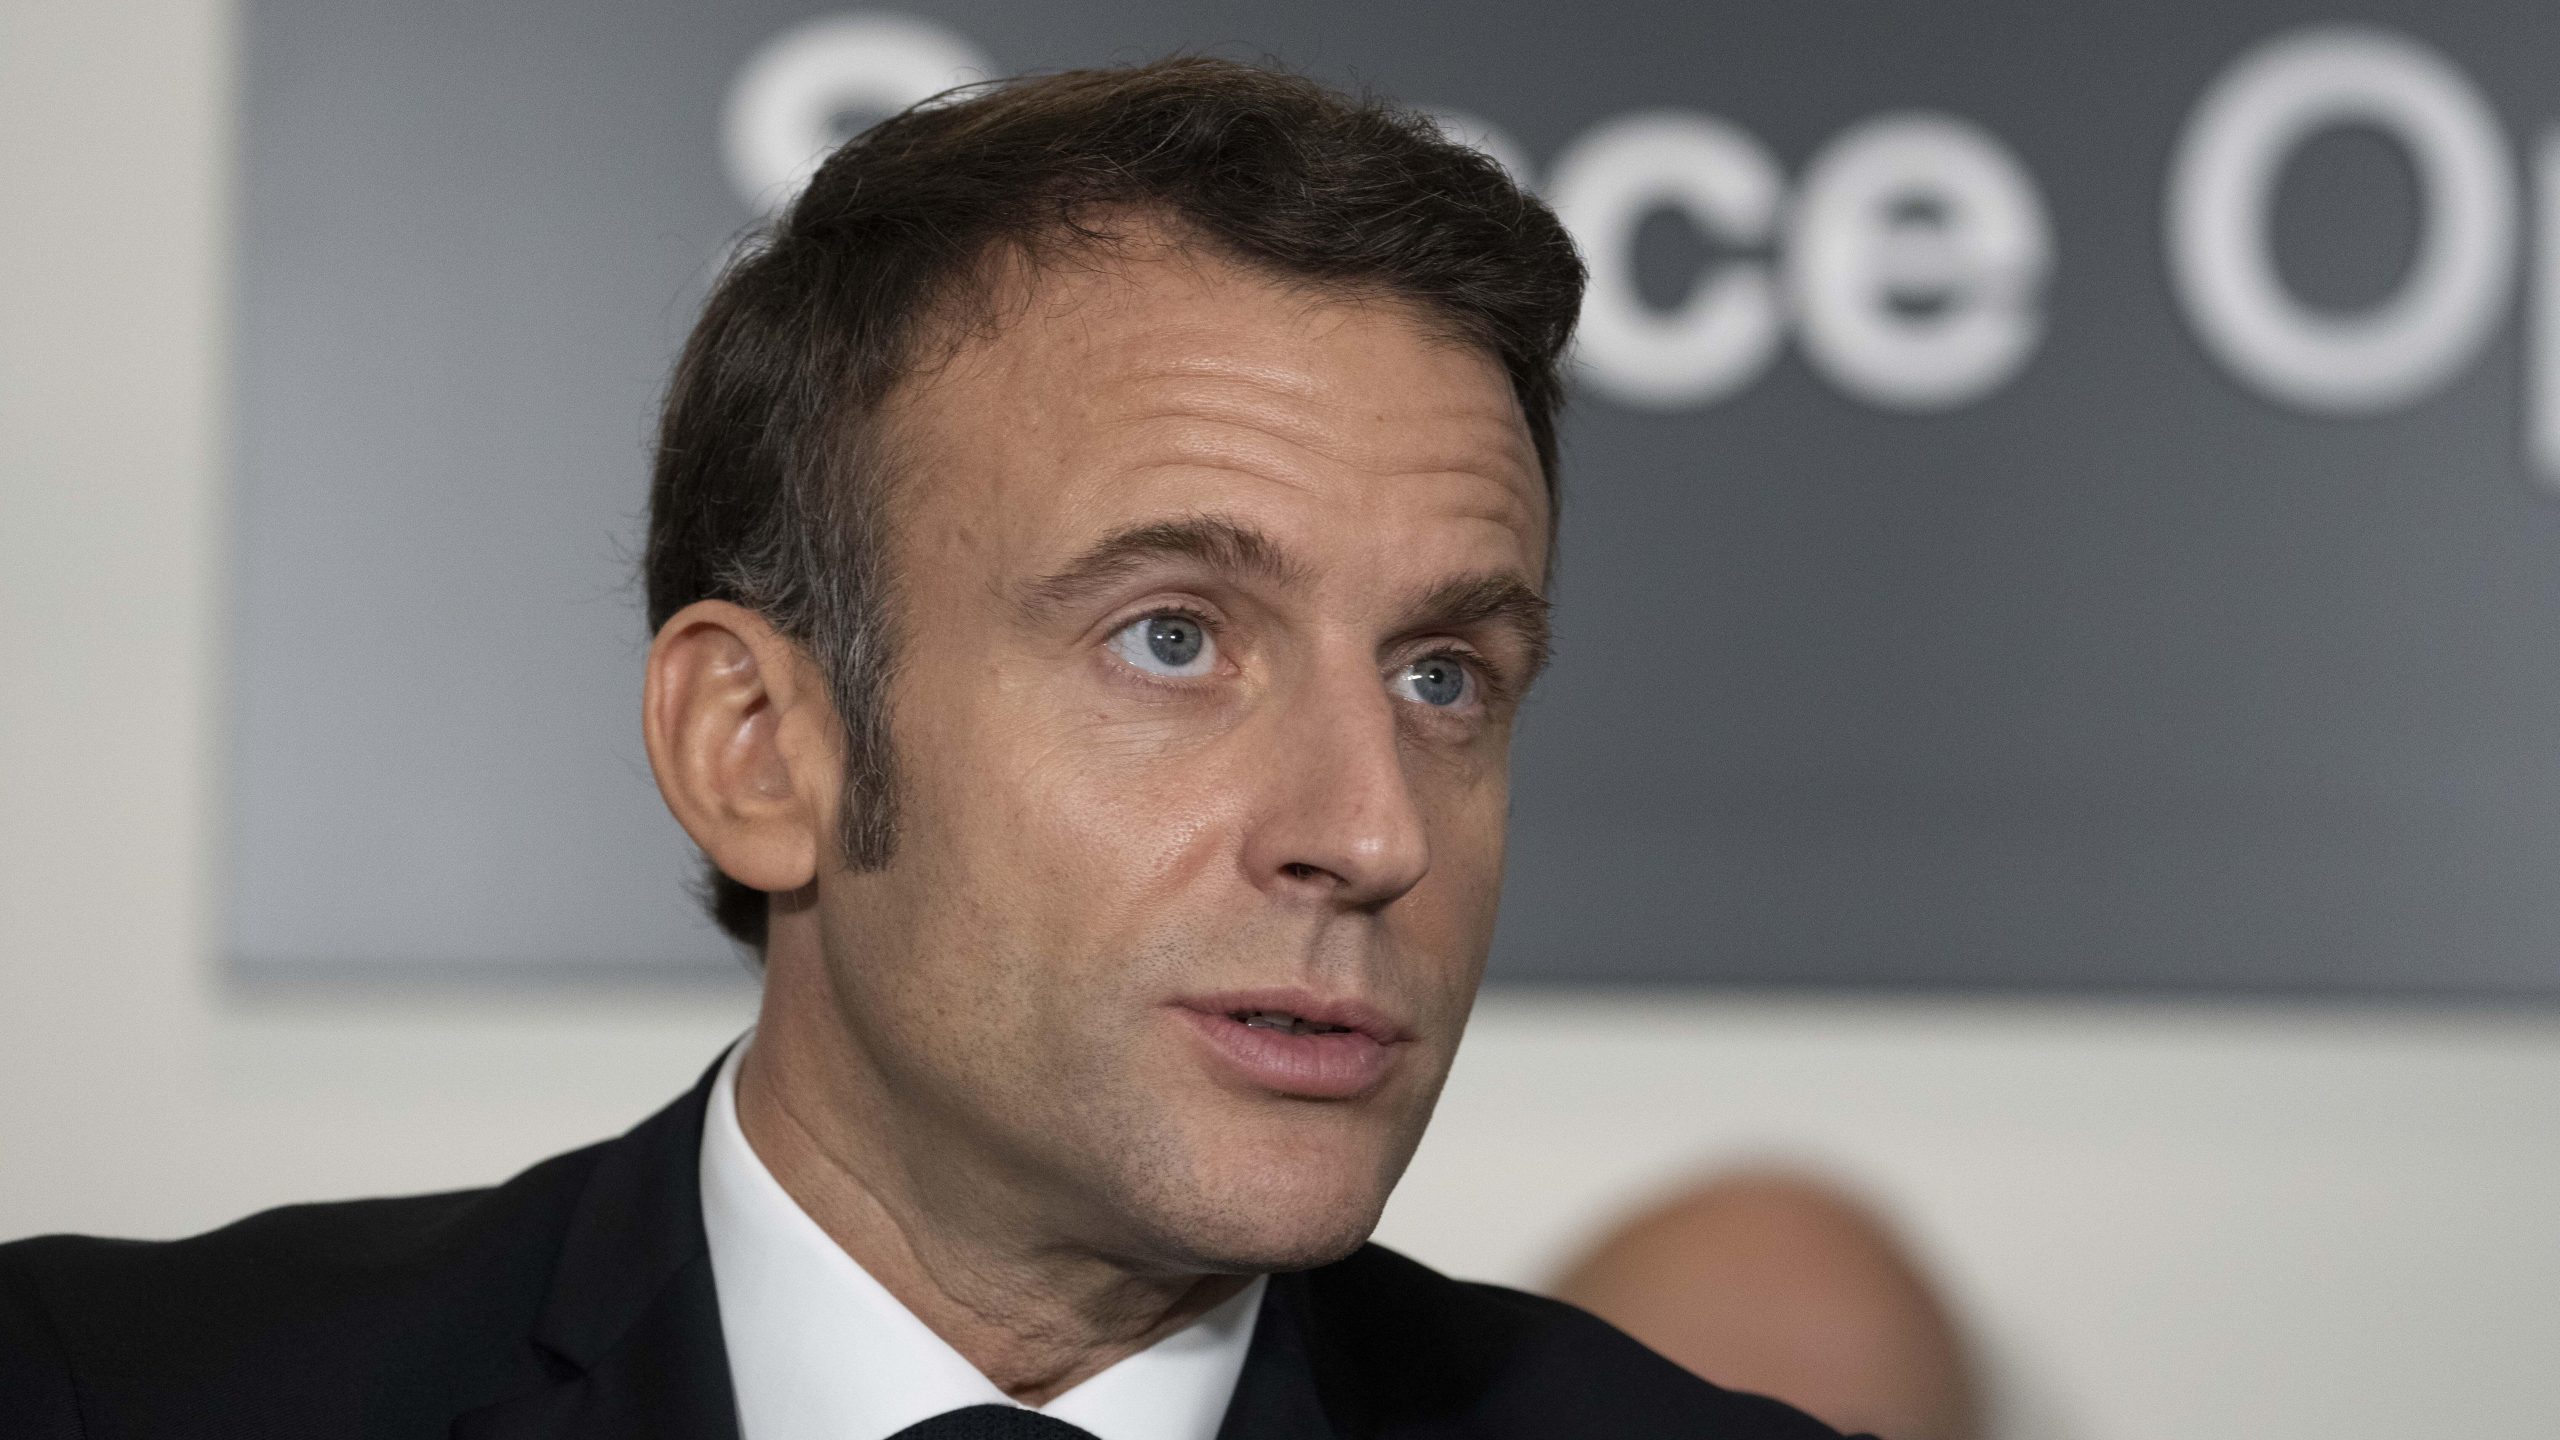 Macron was harshly criticized on the first day of his visit to the United States